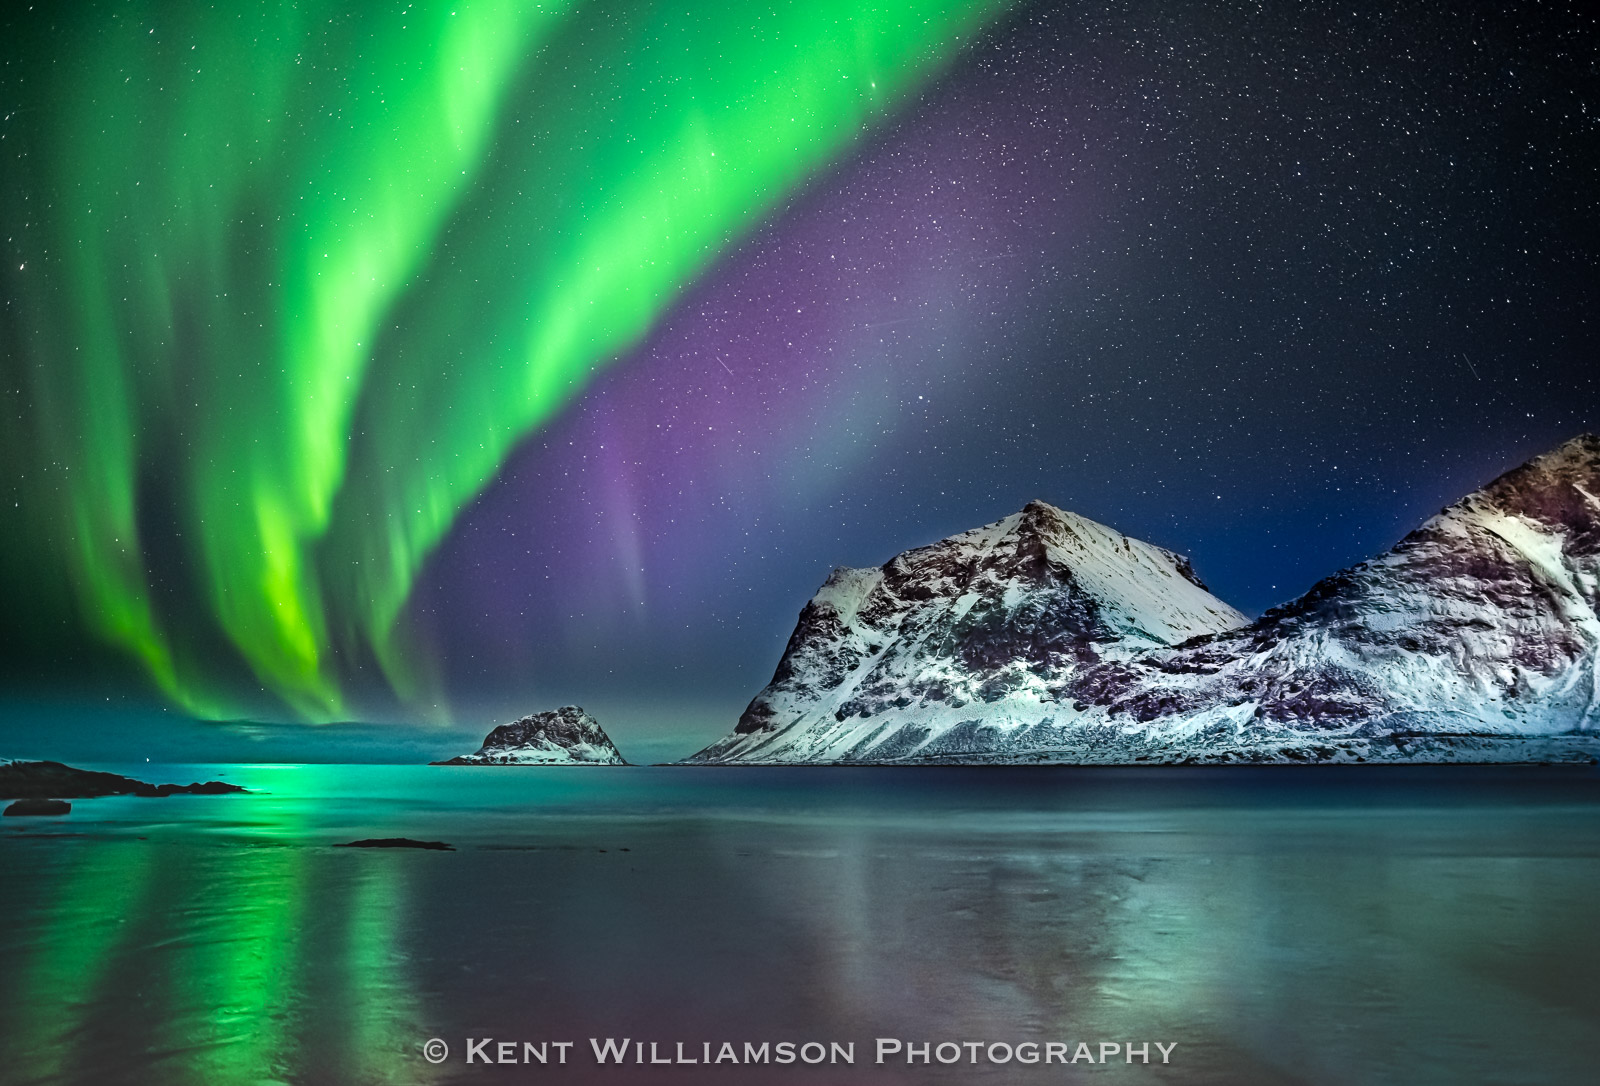 Rapidly-moving Northern Lights in Norway provided interesting patterns.  The Northern Lights were so bright that Haukland Beach...